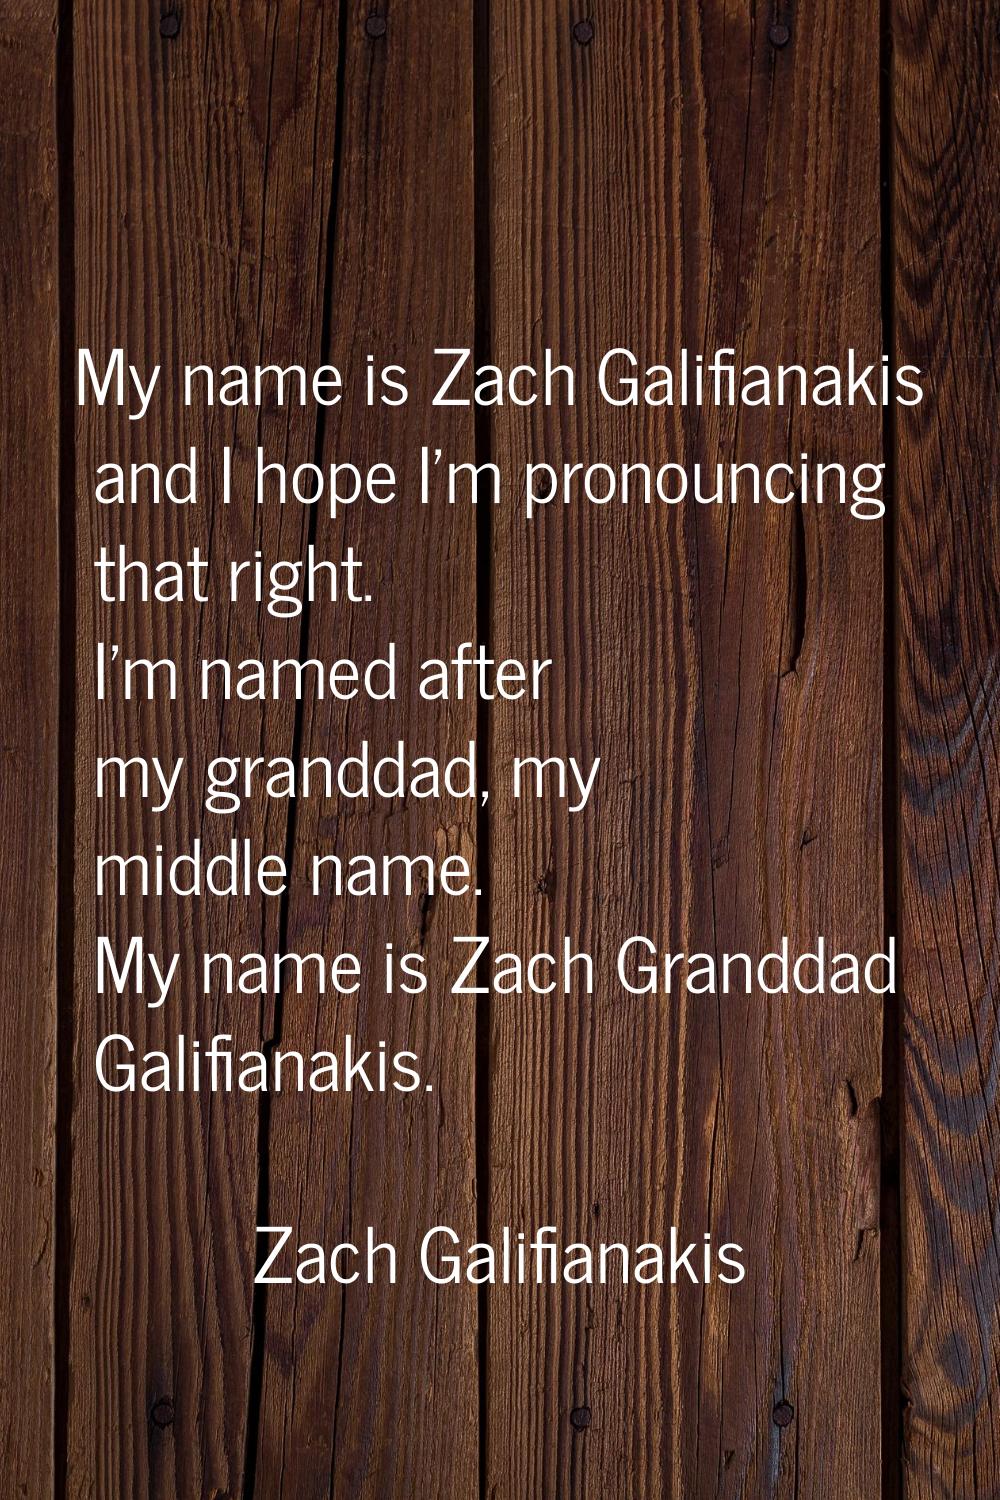 My name is Zach Galifianakis and I hope I'm pronouncing that right. I'm named after my granddad, my